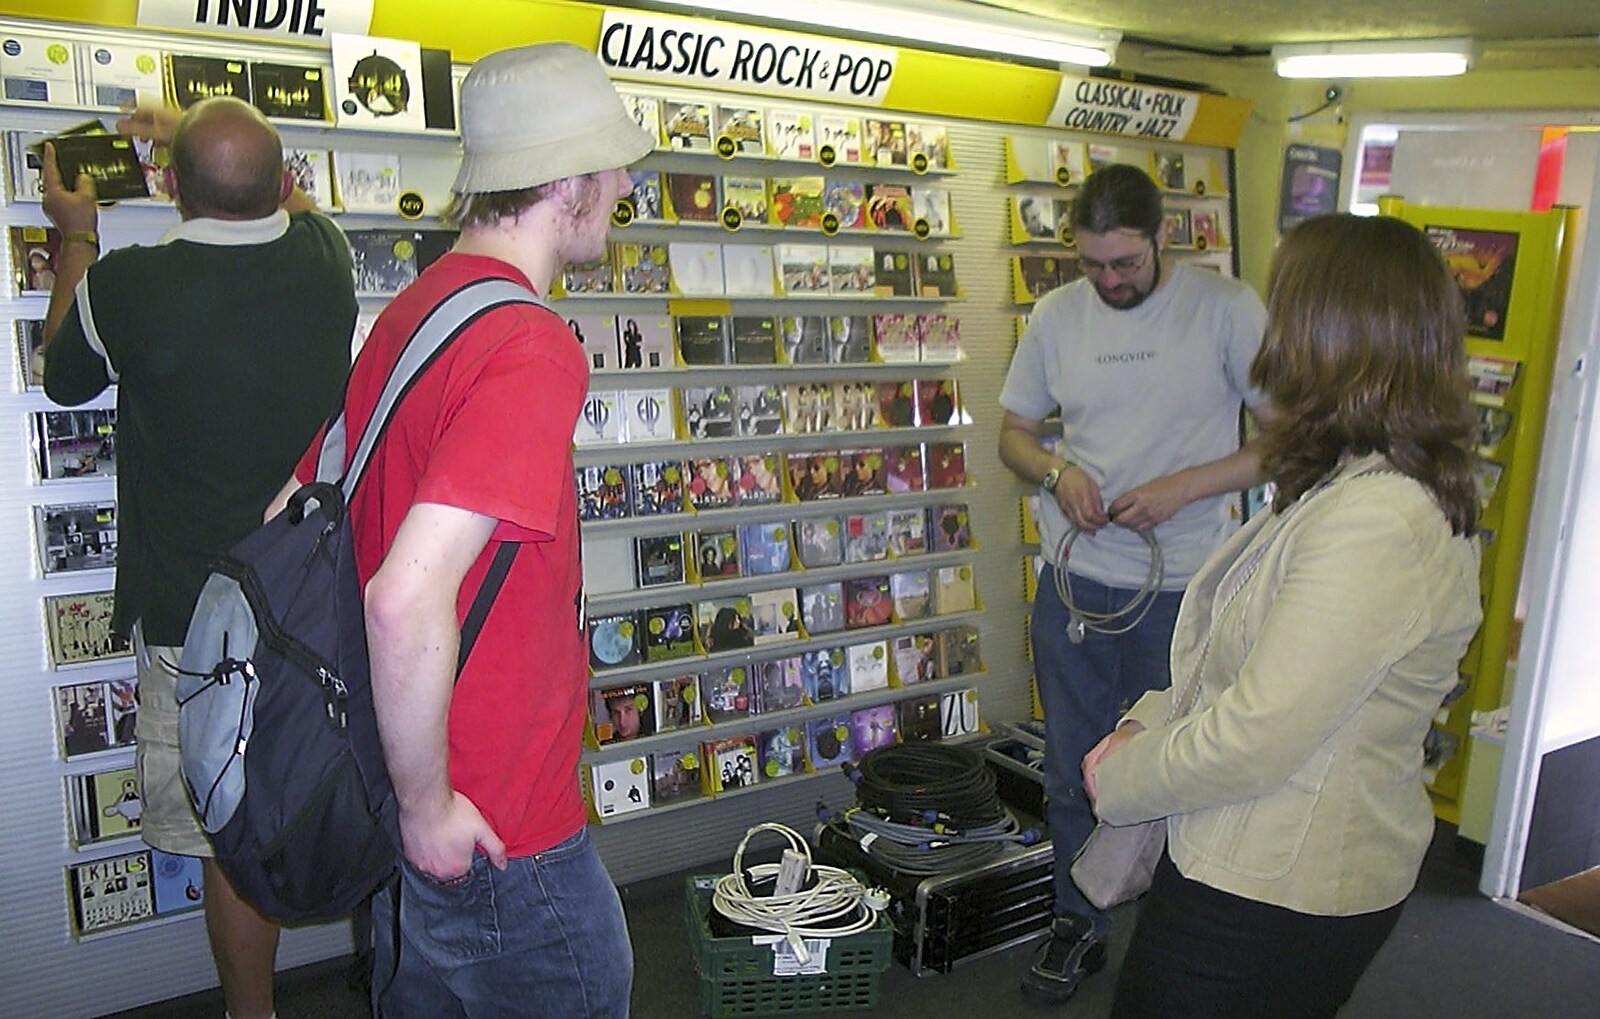 GoodWillOut and Orangejumper talk to the sound guy from Longview play Revolution Records, Diss, Norfolk - 2nd July 2004